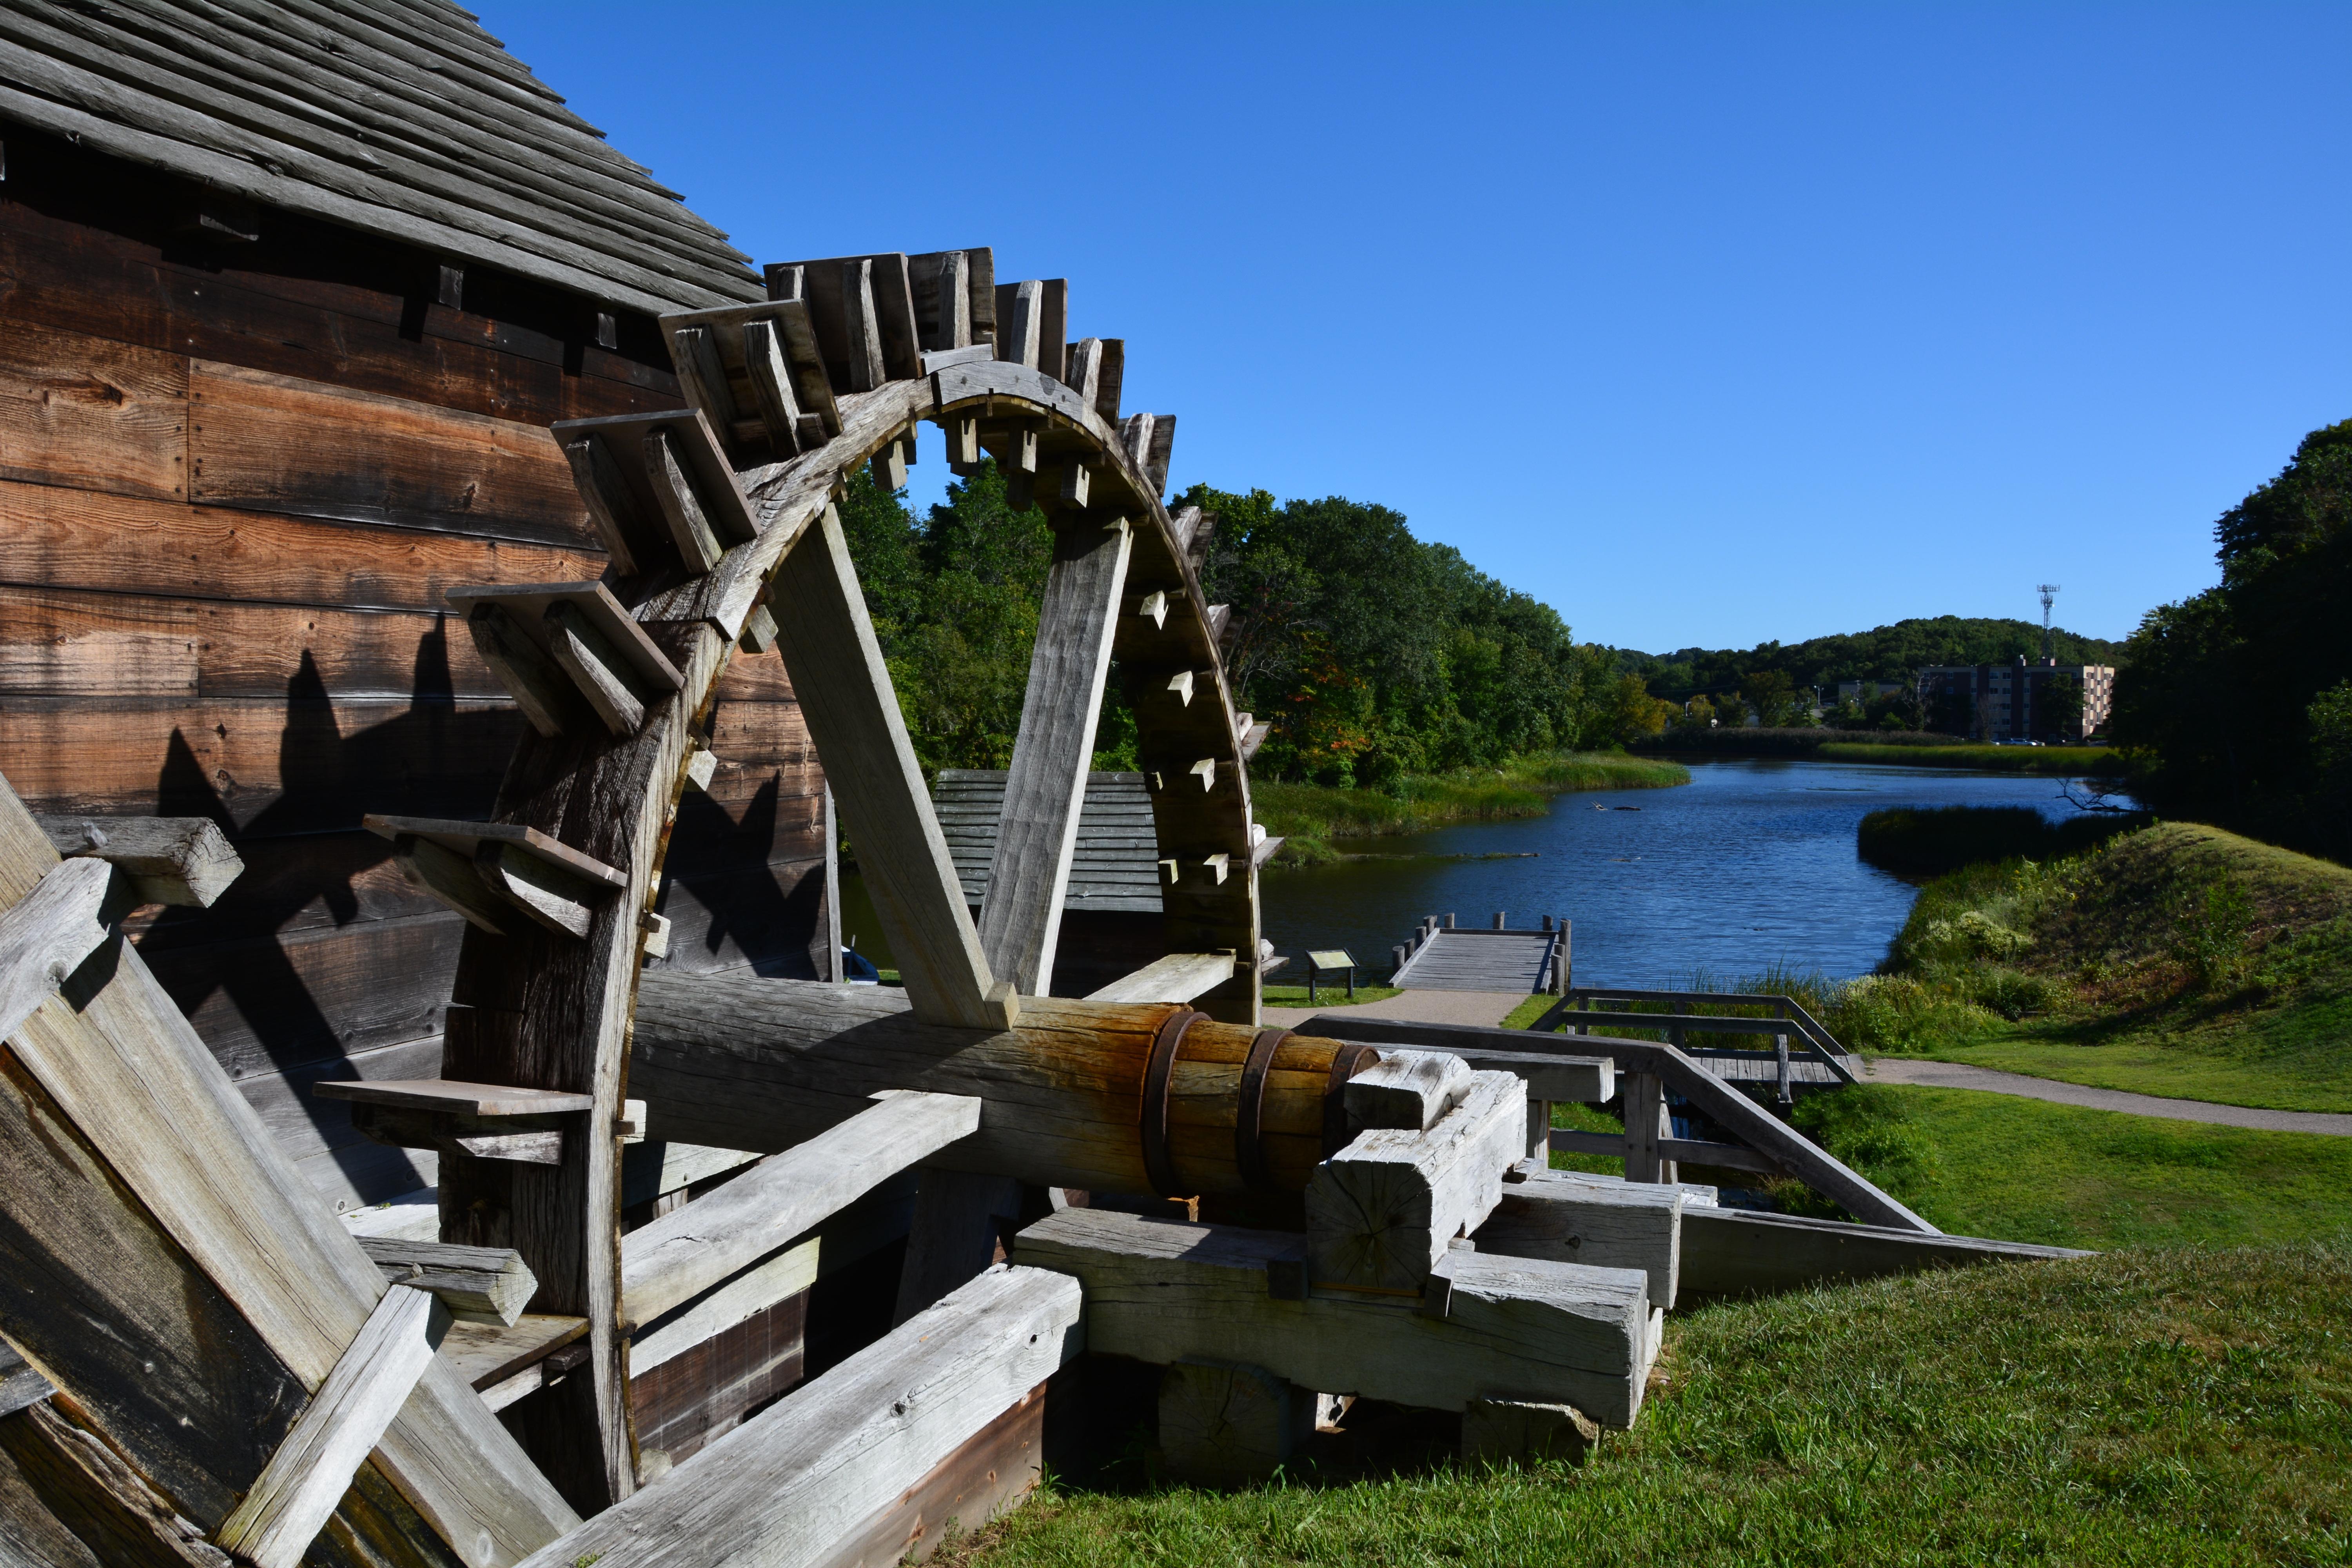 Approximately 15' by 15' spoked wooden wheel beside river and under blue sky.